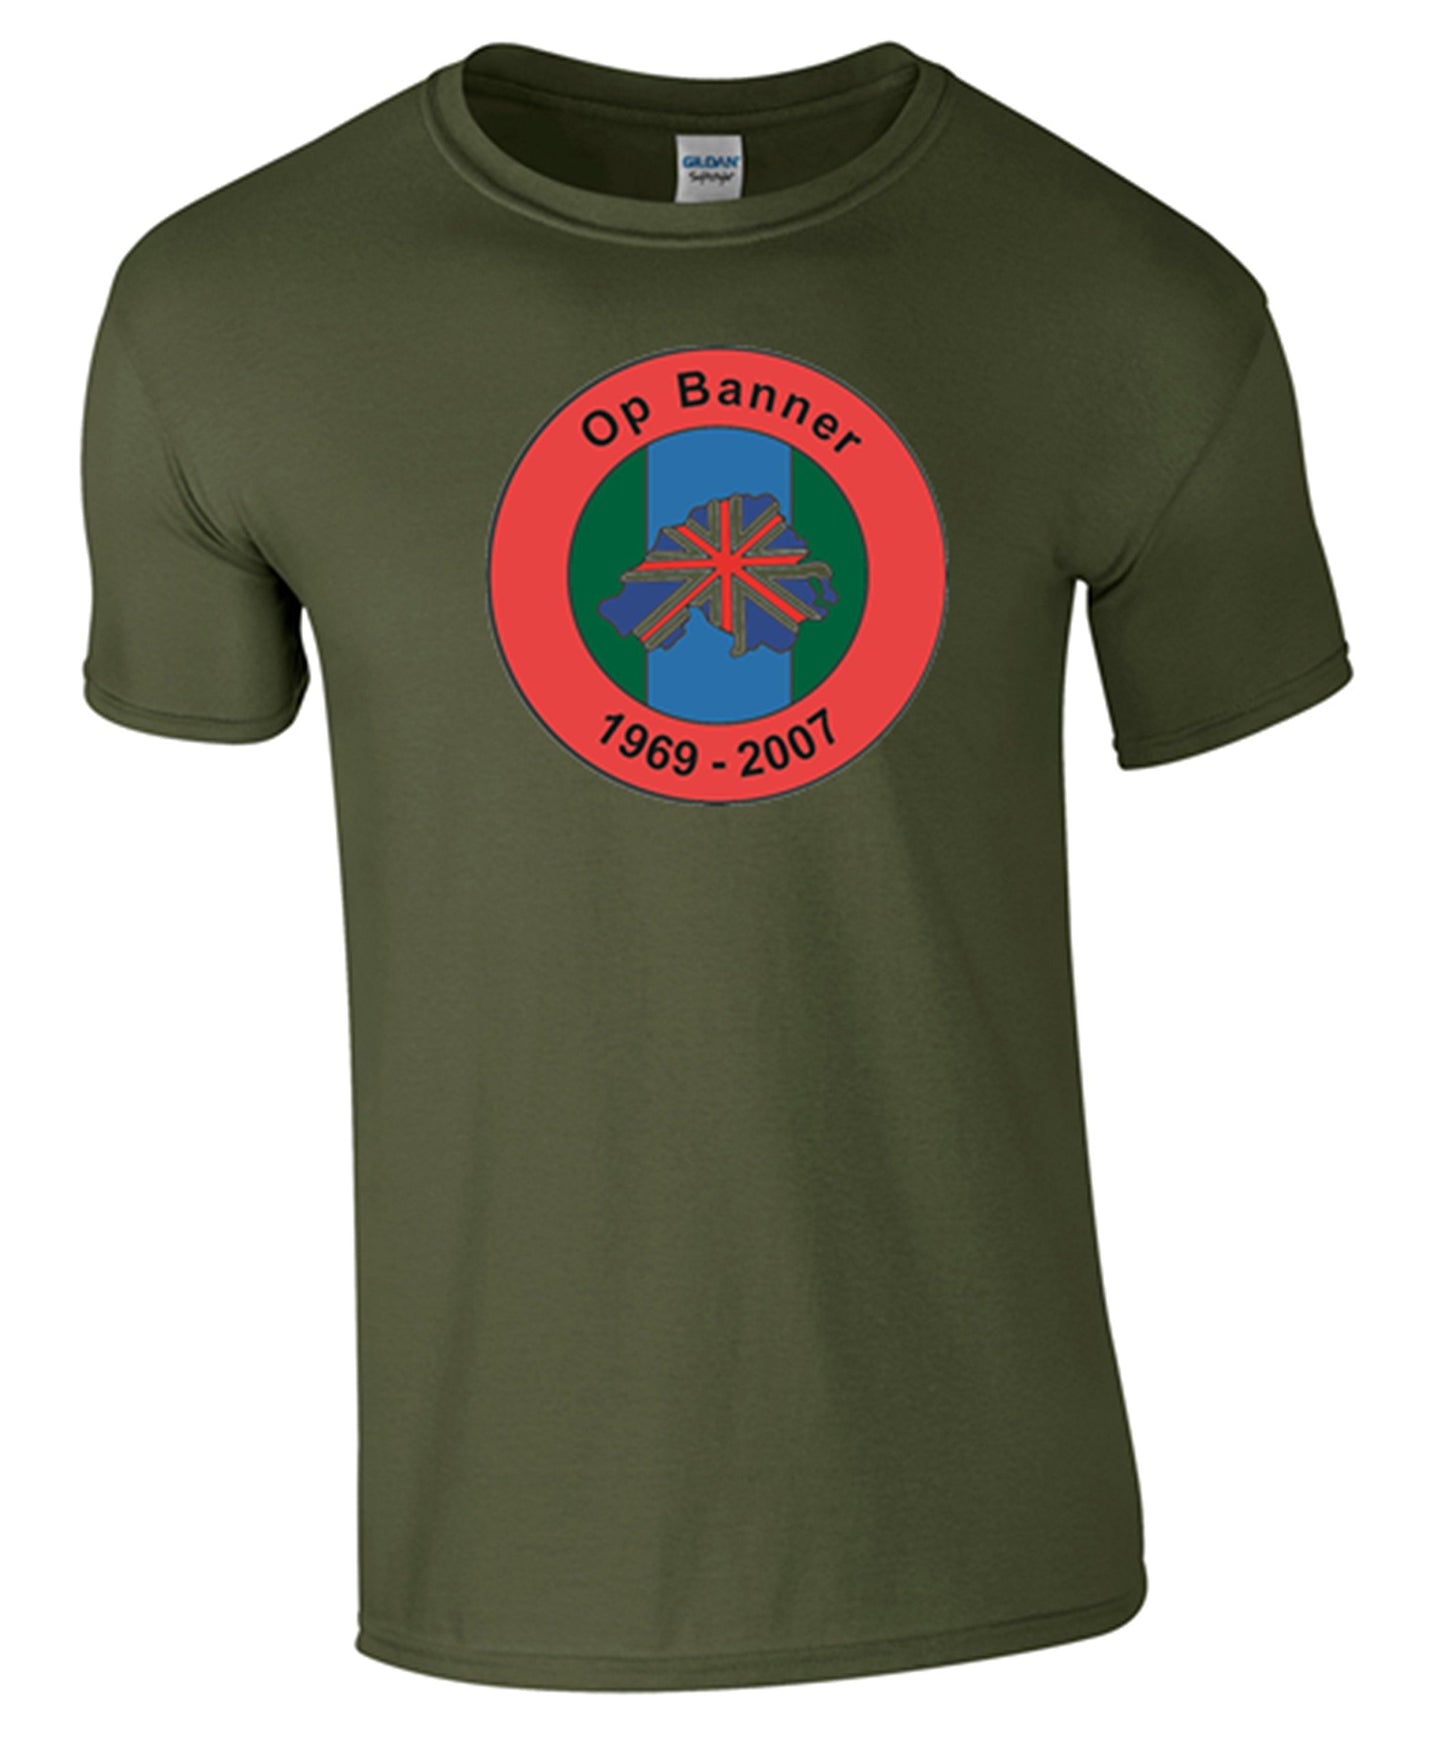 Northern Ireland Ops Banner T-Shirt (XL, Green) - Army 1157 kit Army 1157 Kit